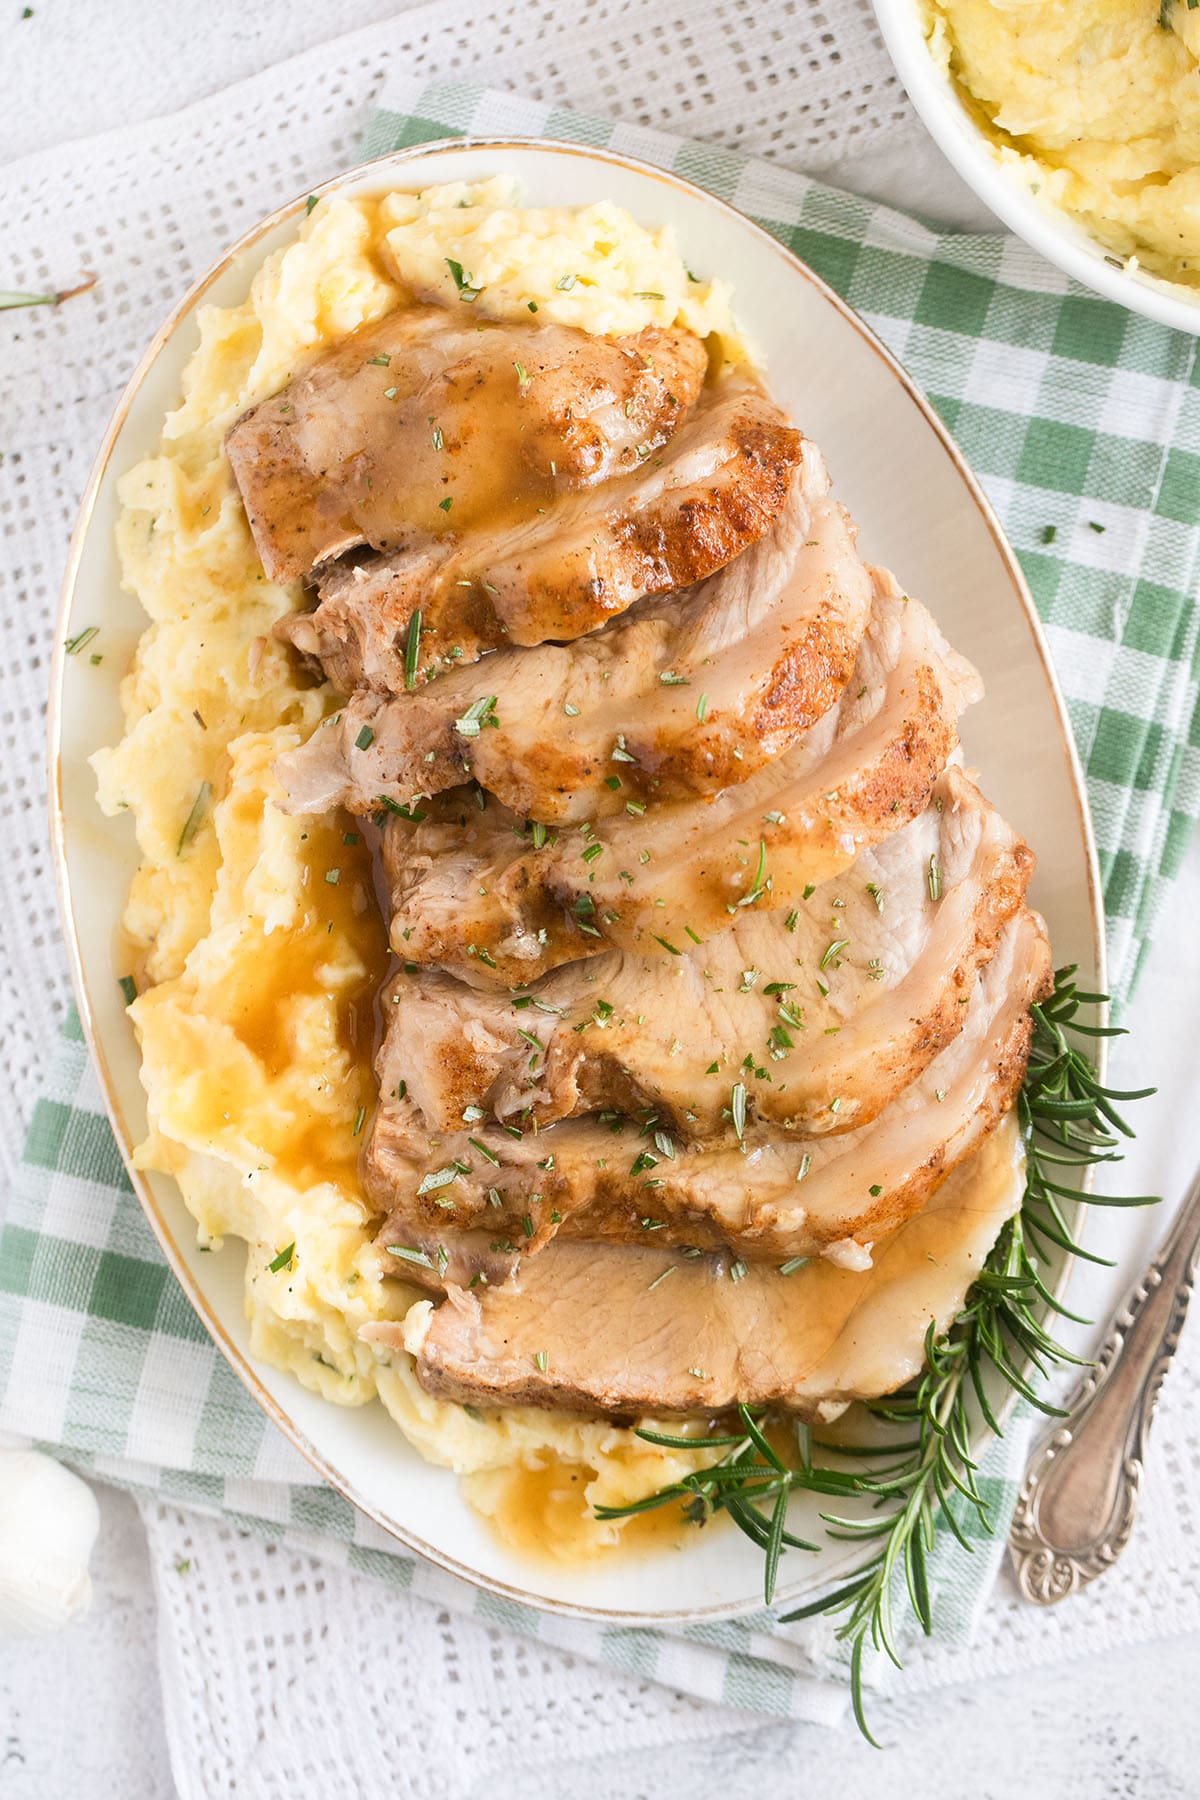 one large platter with sliced pork loin, mashed potatoes and gravy.